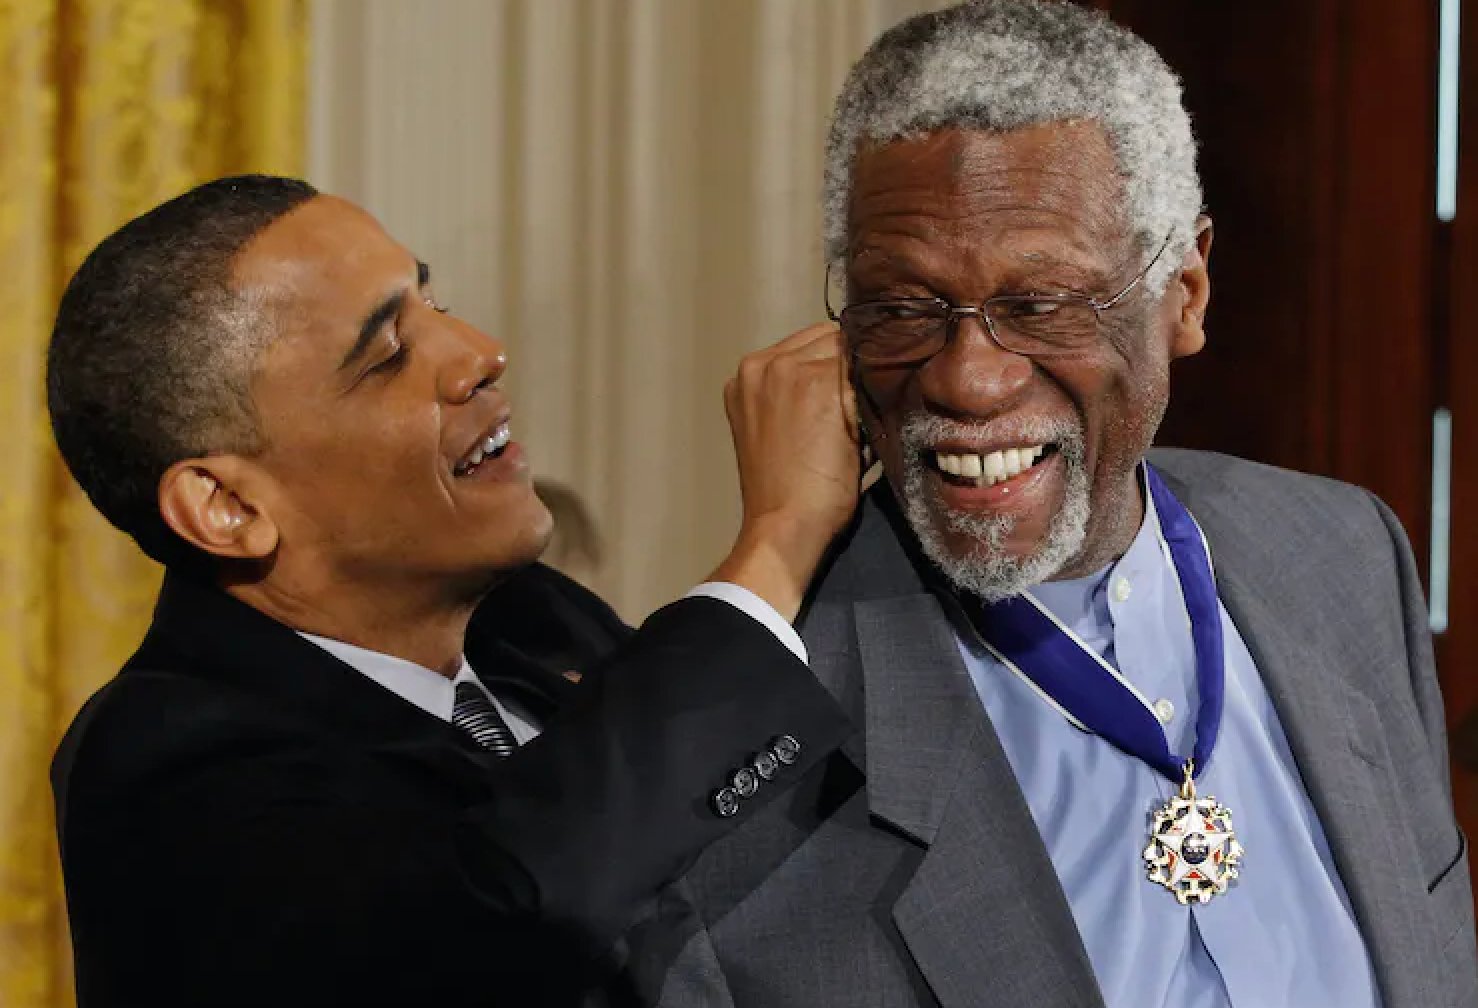 President Barack Obama presents NBA champion and human rights advocate Bill Russell with the Medal of Freedom on Feb. 15, 2011.